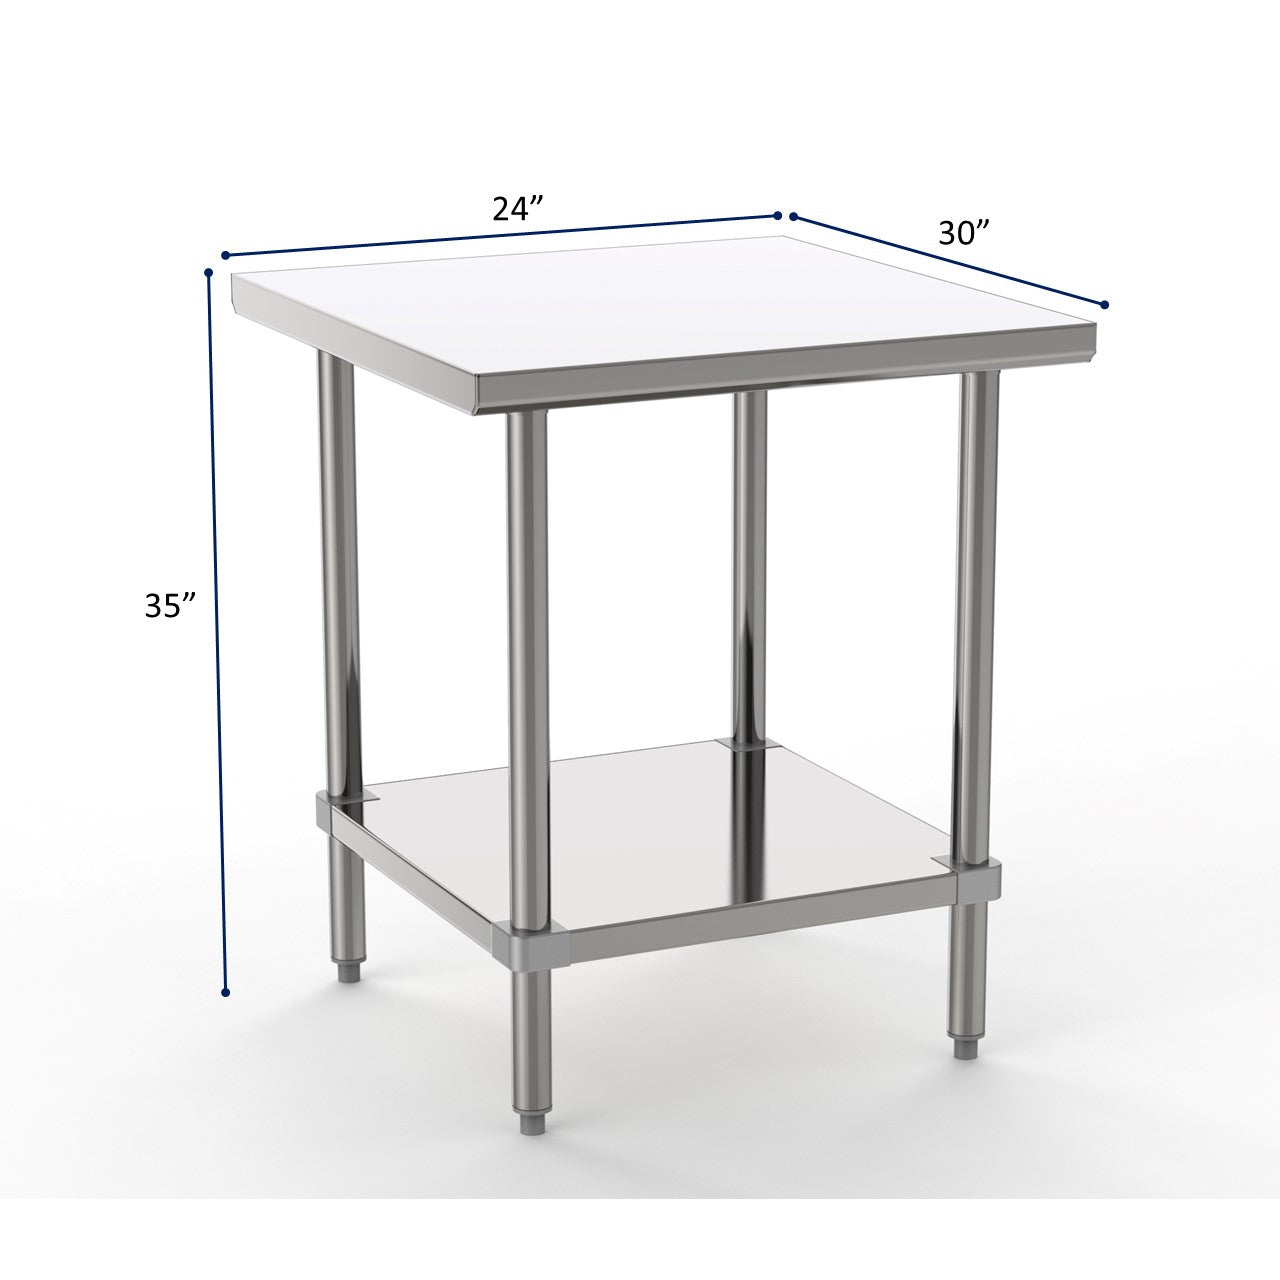 GSW Commercial Grade Flat Top Work Table with Stainless Steel Top, Galvanized Undershelf & Legs, Adjustable Bullet Feet, NSF/ETL Approved to Meet Sanitation Food Service Standard 37 (30"W x 24"L x 35"H)